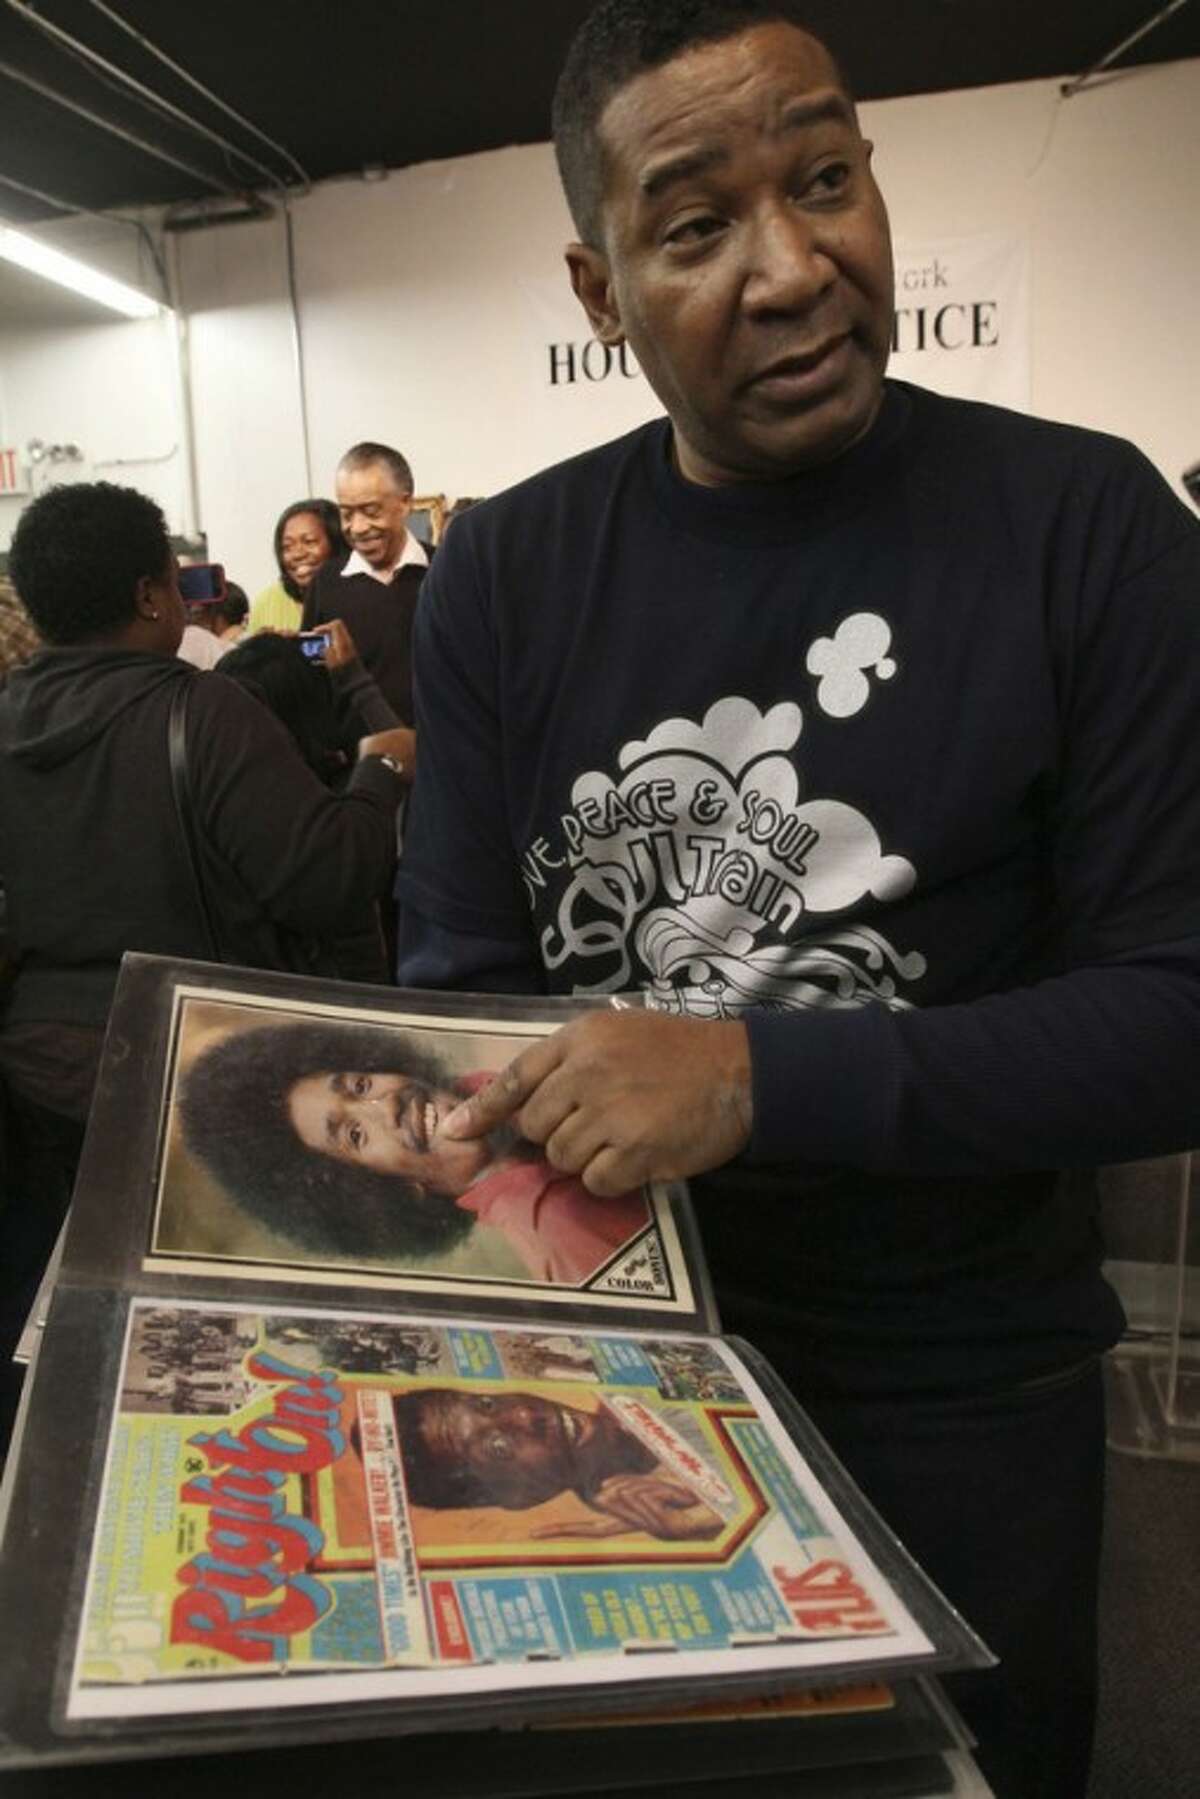 Tyrone Proctor shows a picture of himself from the time when he was a "Soul Train" dancer as he is interviewed following a tribute to "Soul Train" creator Don Cornelius at Rev. Al Sharpton's National Action Network in New York Saturday, Feb. 4, 2012. Cornelius died this week at his Los Angeles home of a self-inflicted gunshot wound. He was 75. (AP Photo/Tina Fineberg)